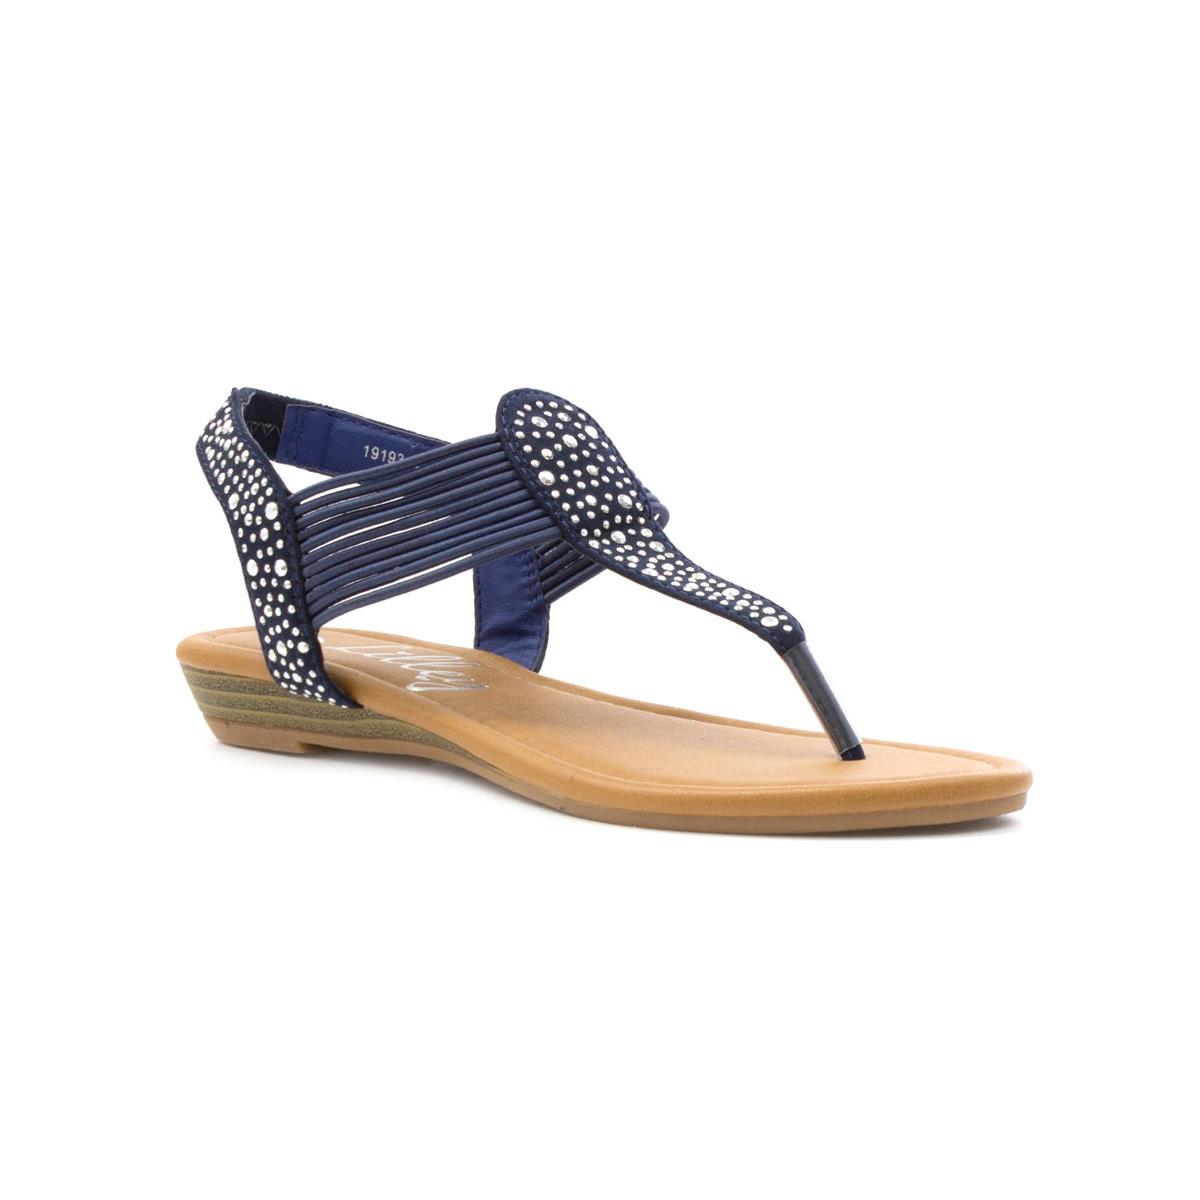 Lilley Womens Navy Studded Toe Post Sandal-19193 | Shoe Zone